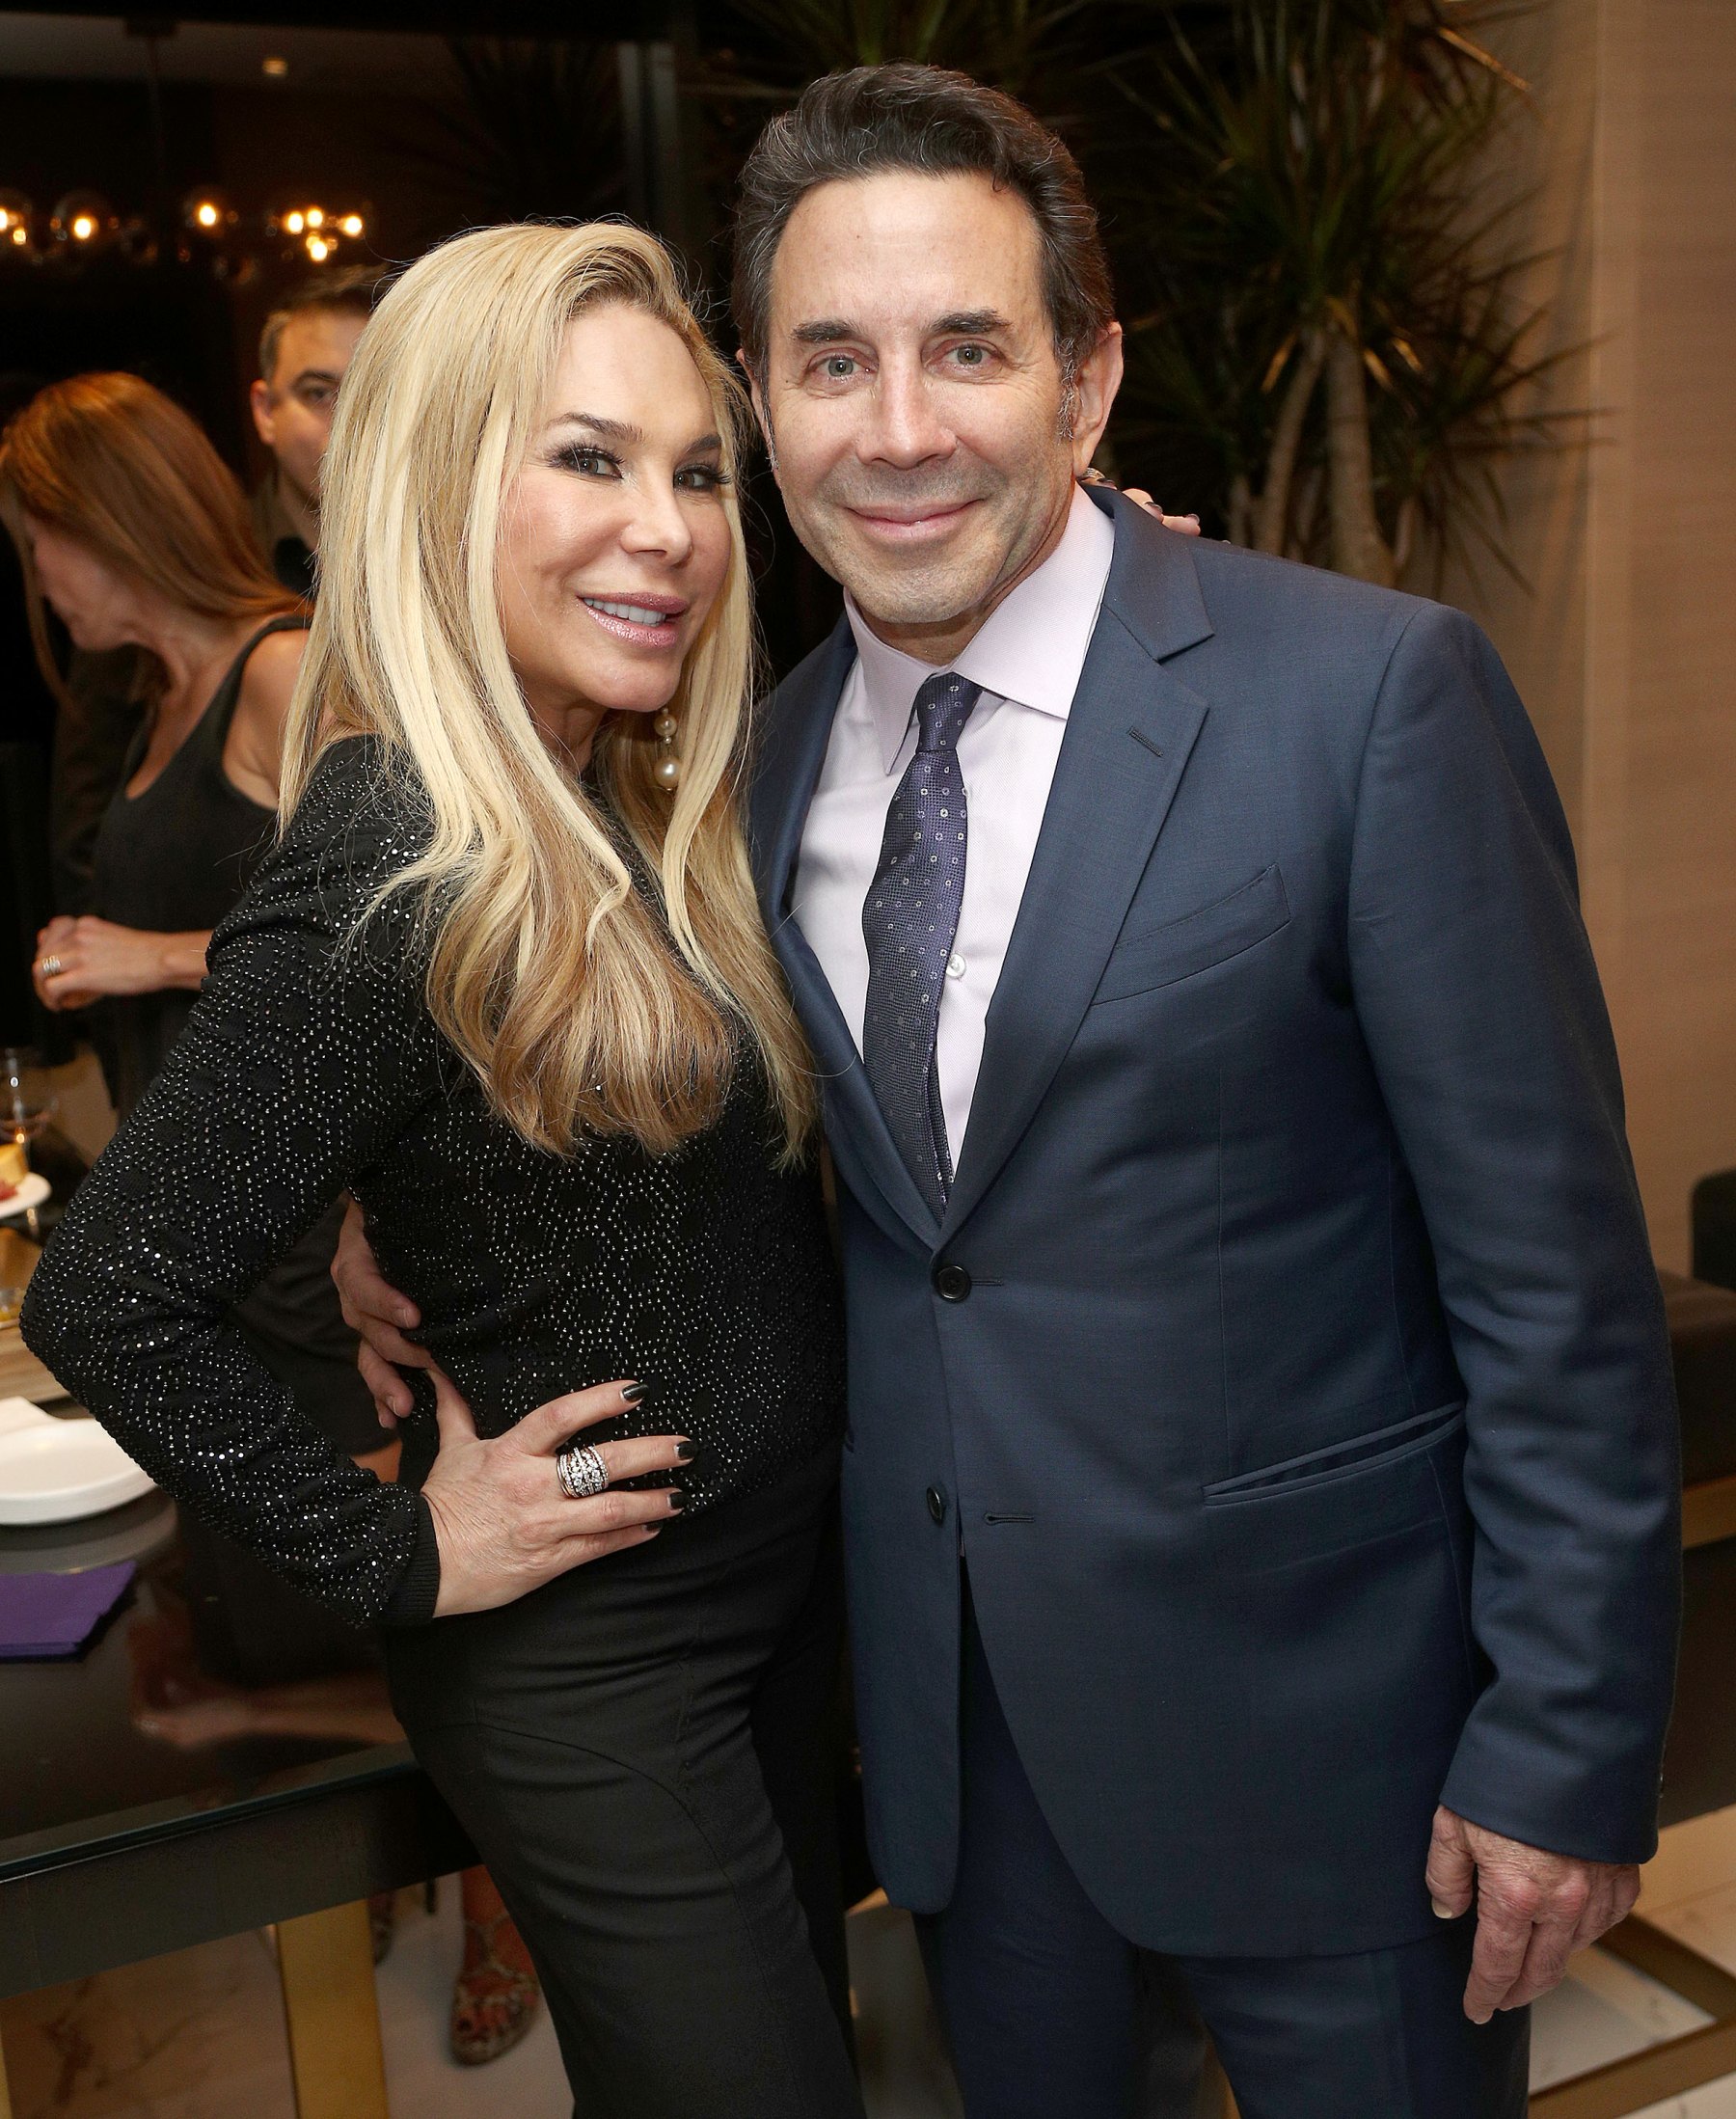 Botched Rhobh Star Paul Nassif Is Engaged To Brittany Pattakos Pic 5395